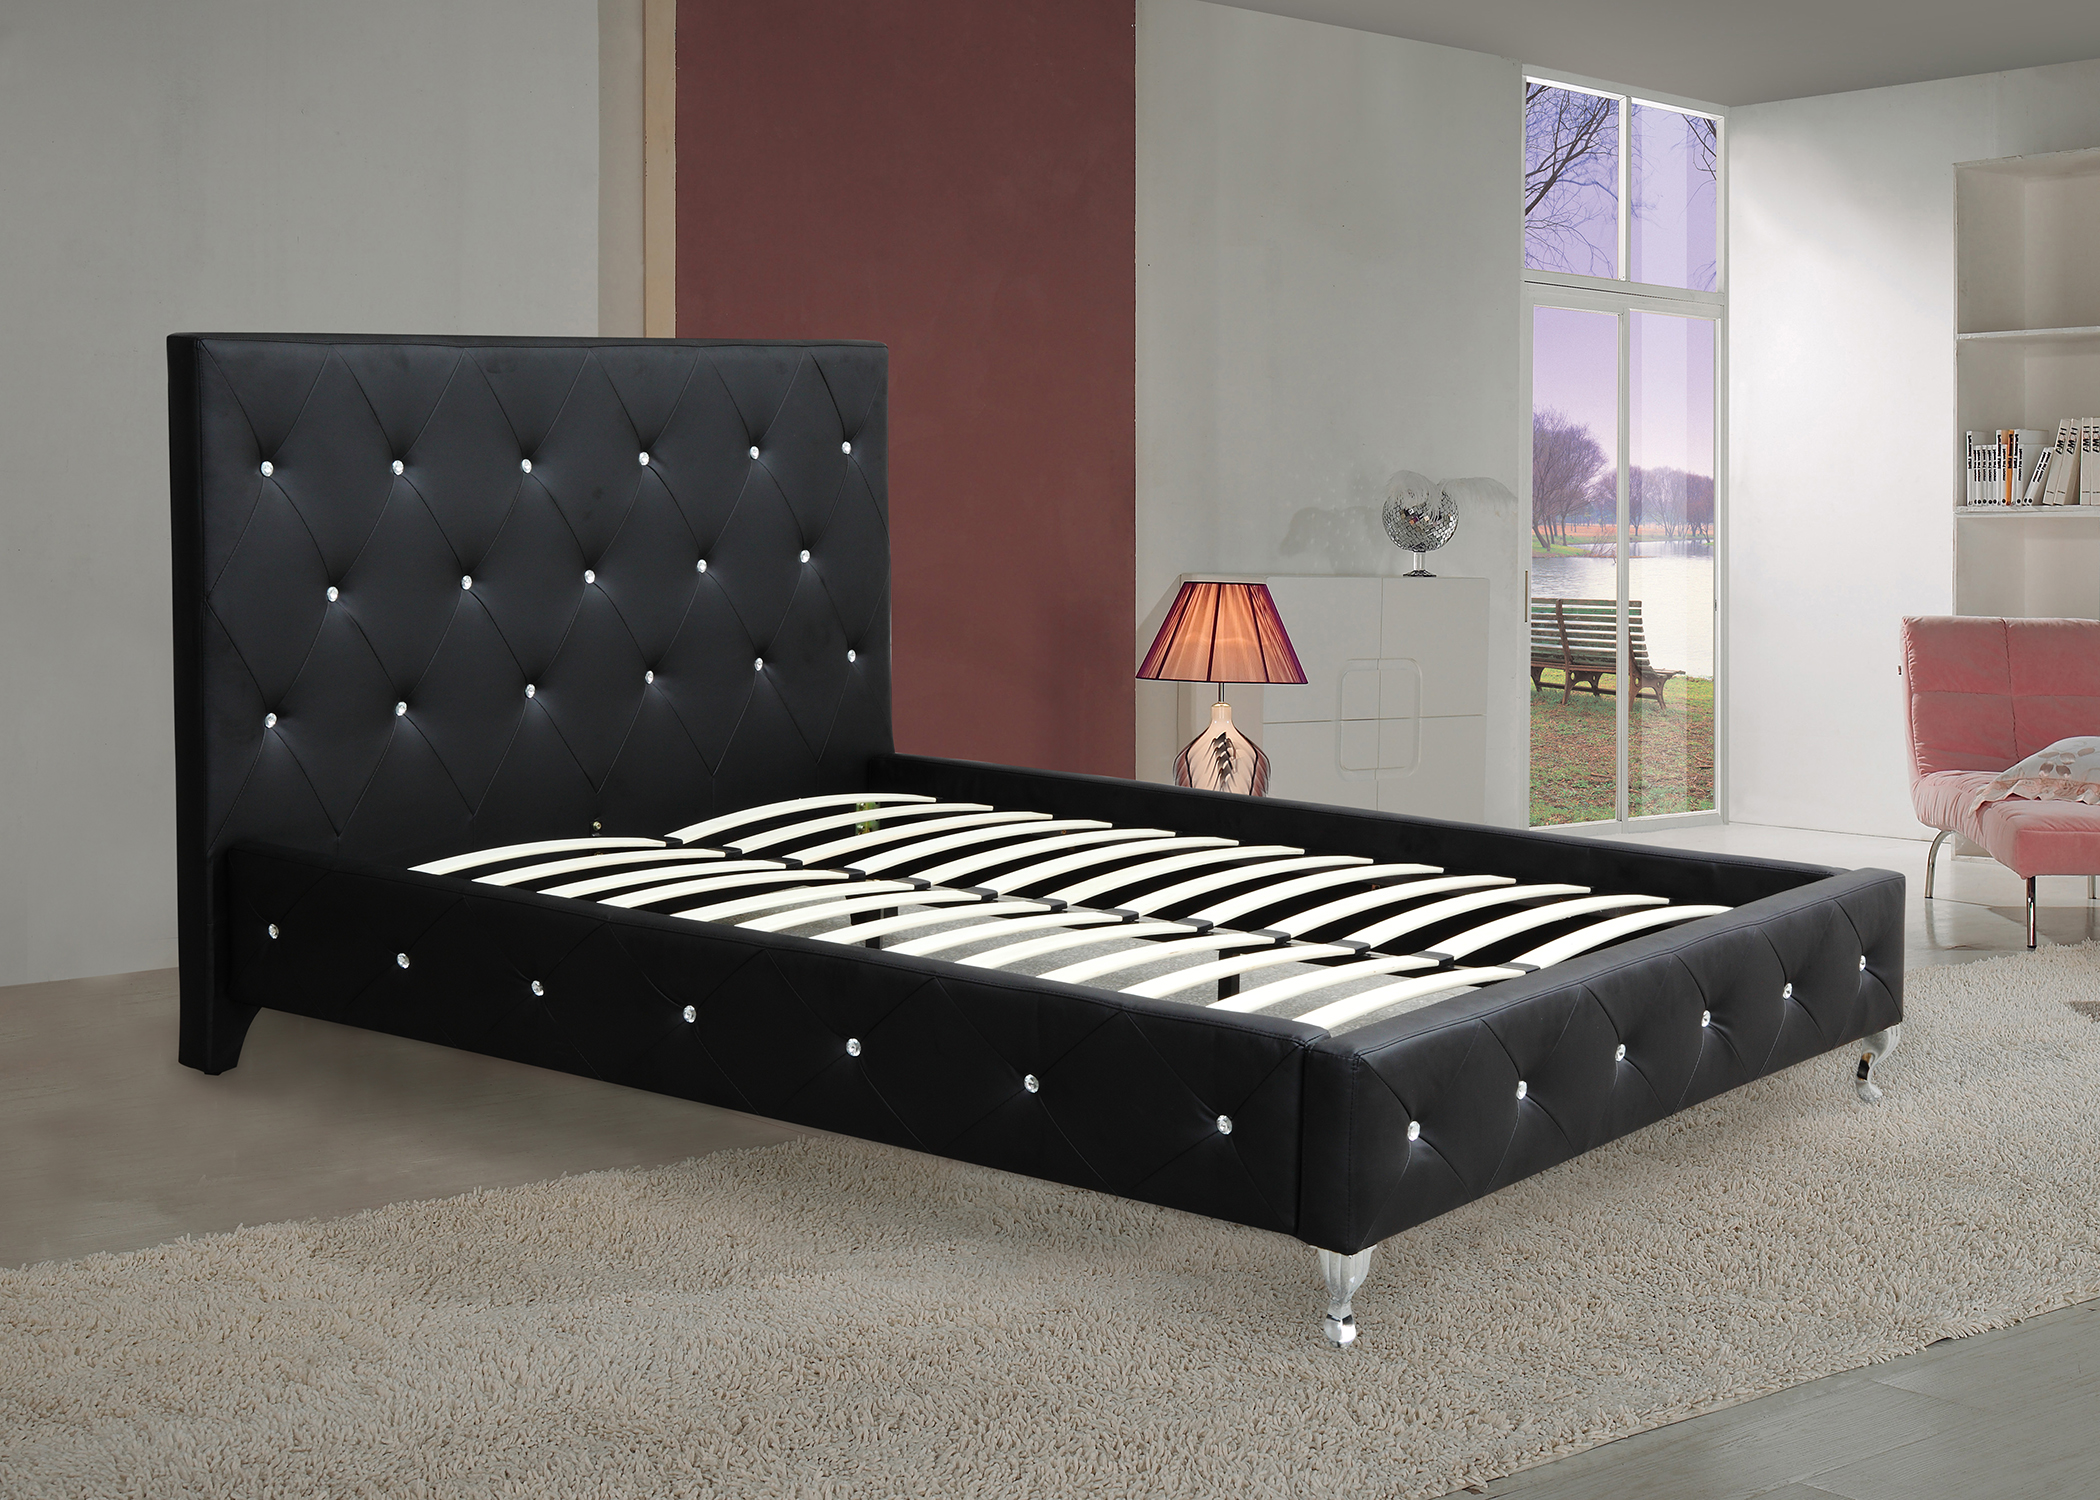 Ac-bed16-black-storage Bench Bonded Leather